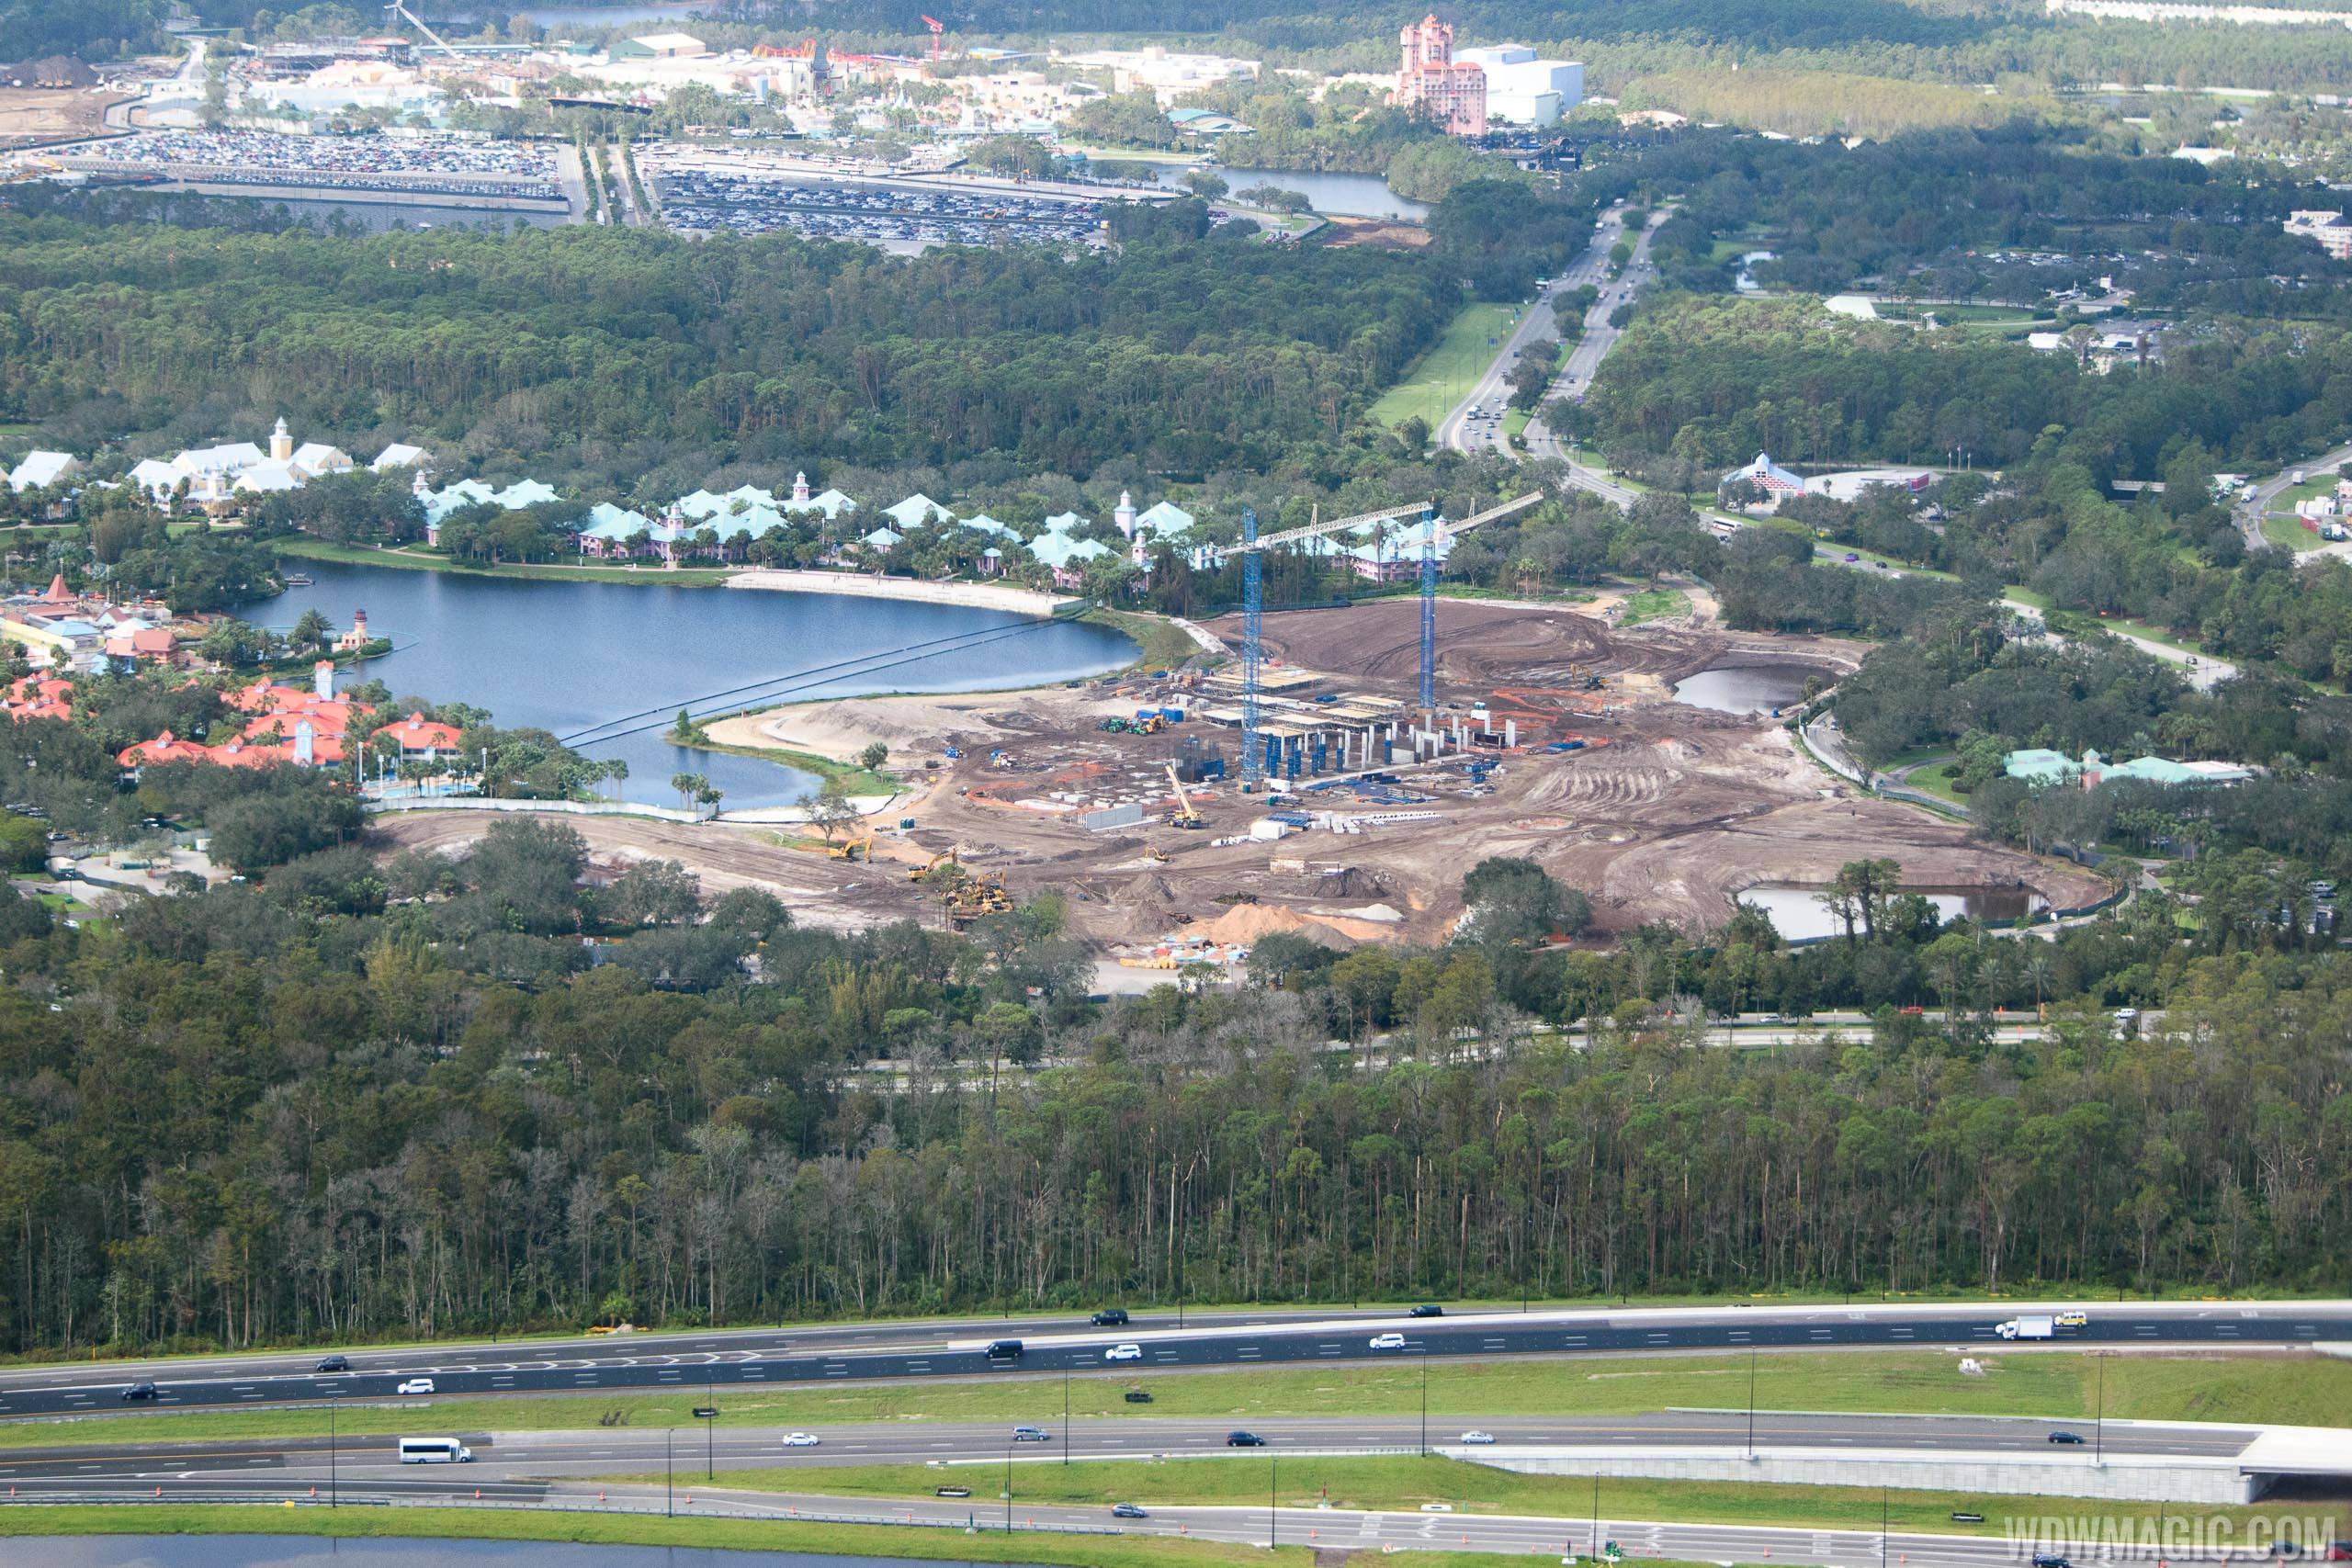 Disney Riviera construction from the air